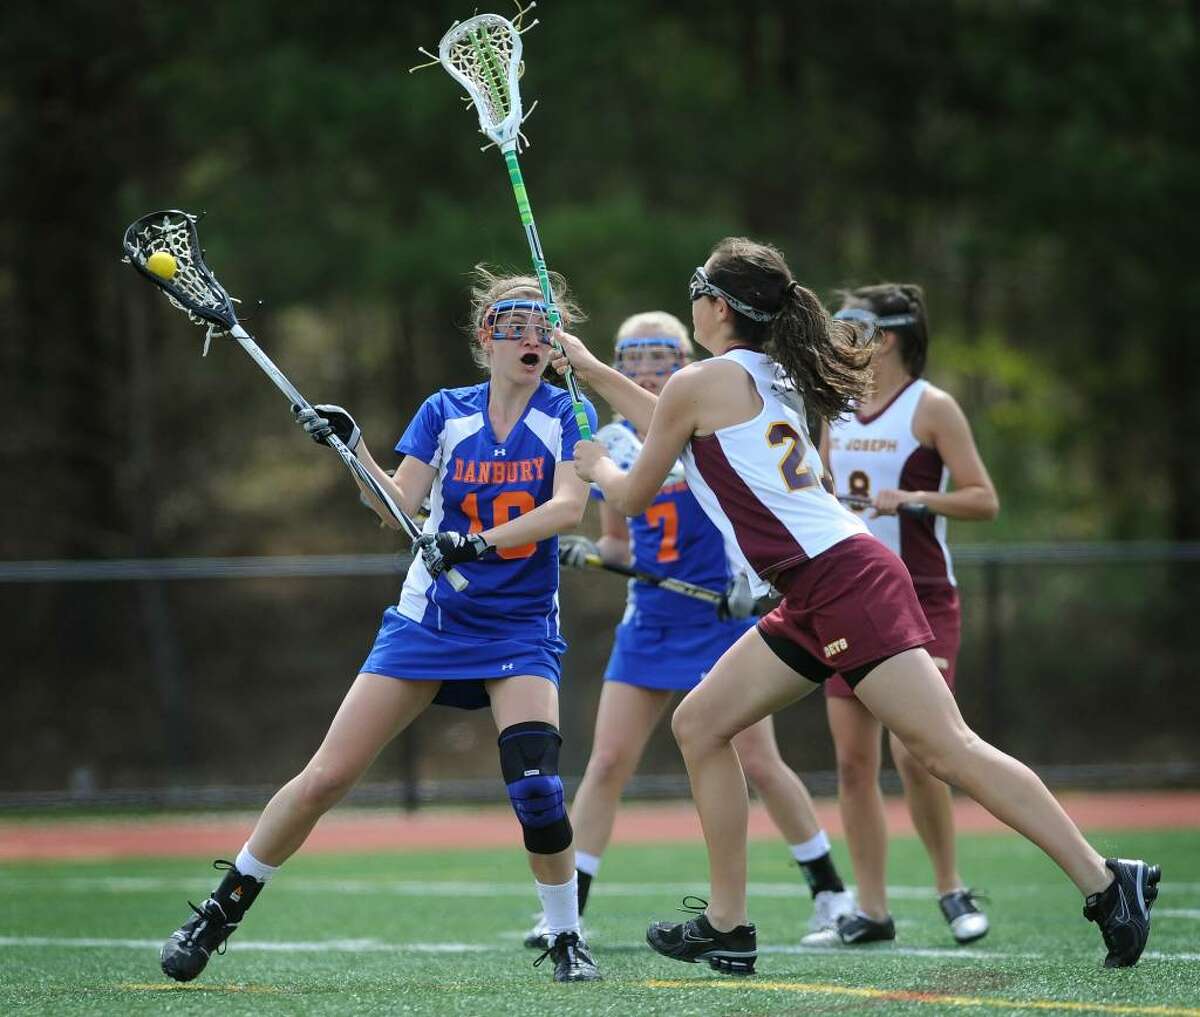 Danbury's Andrea Tarsi, left is defended by St. Joseph's Julie DoCarmo during Tuesday's girls lacrosse matchup at St. Joseph High School in Trumbull.